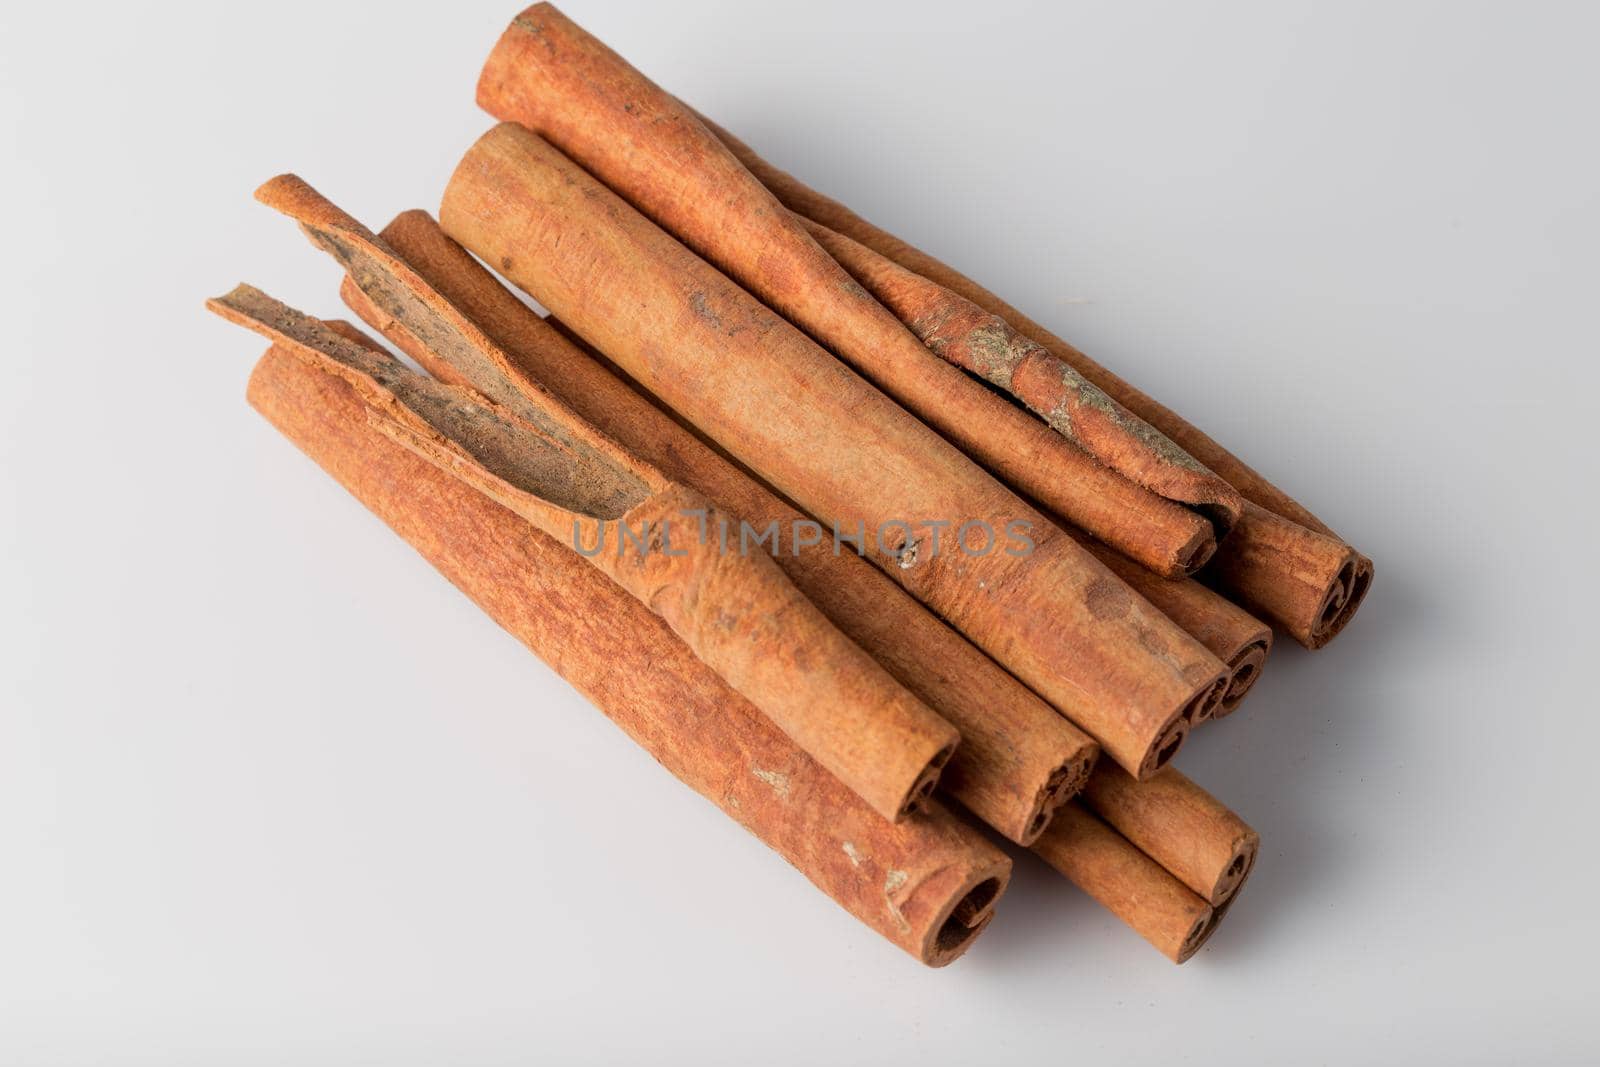 cinnamon isolated on white background by whatwolf